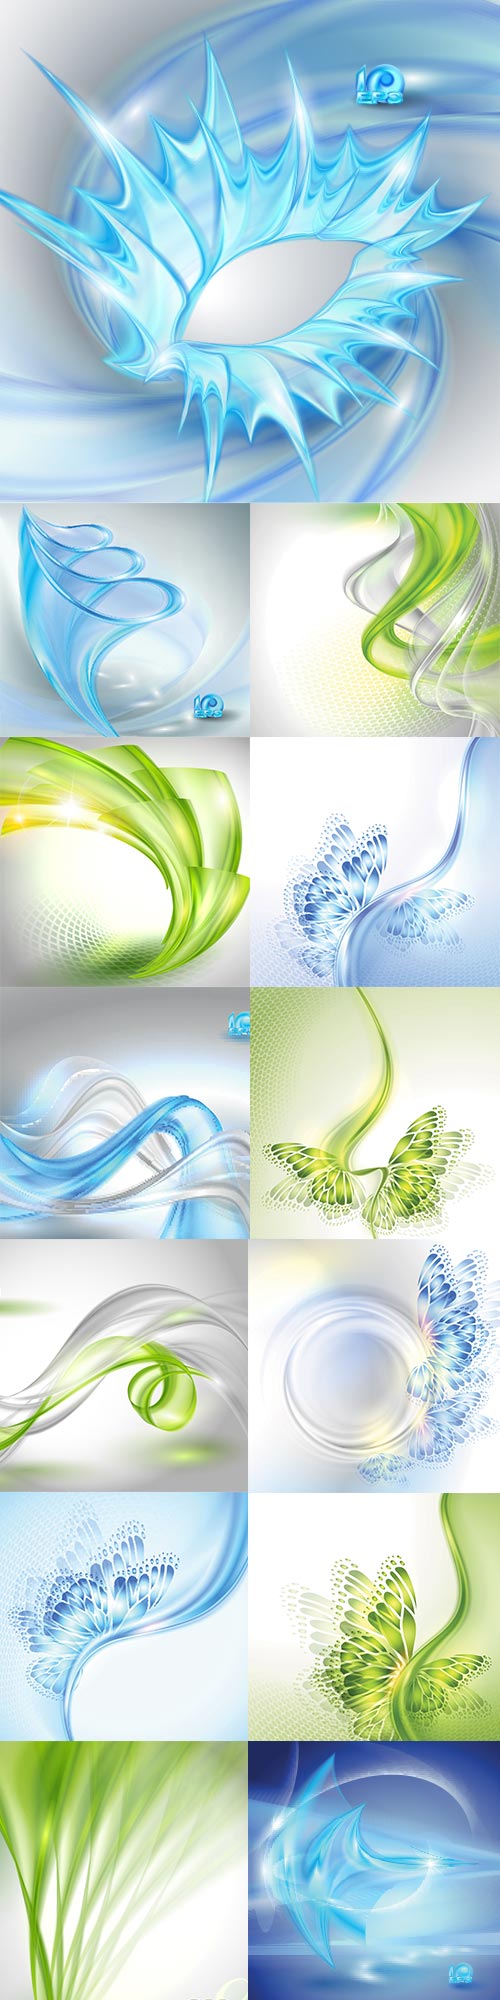 Bright colorful abstract backgrounds vector - 87